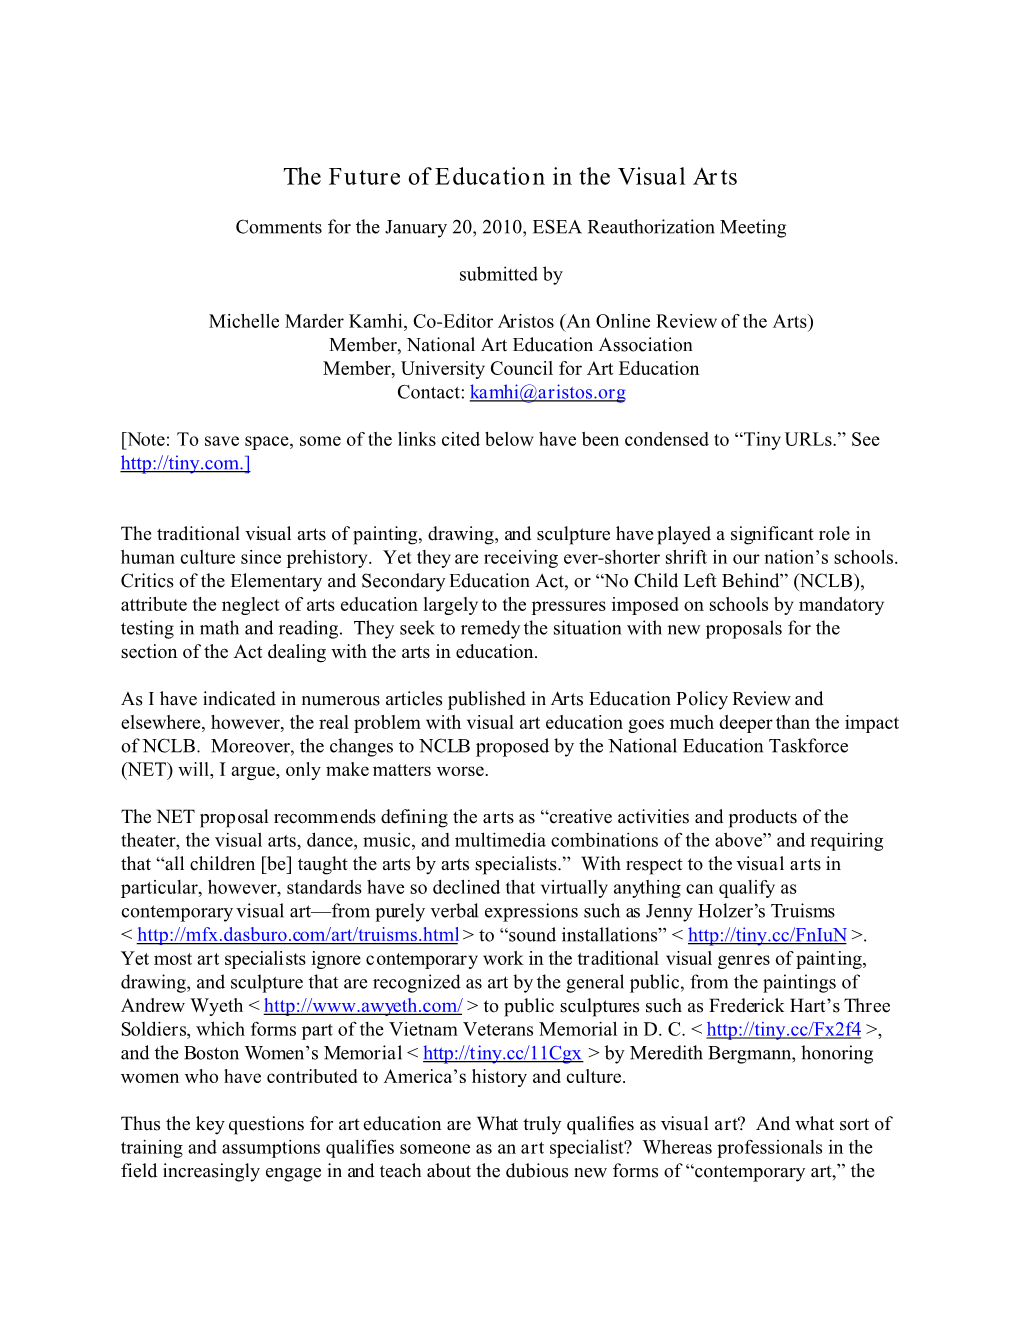 The Future of Education in the Visual Arts